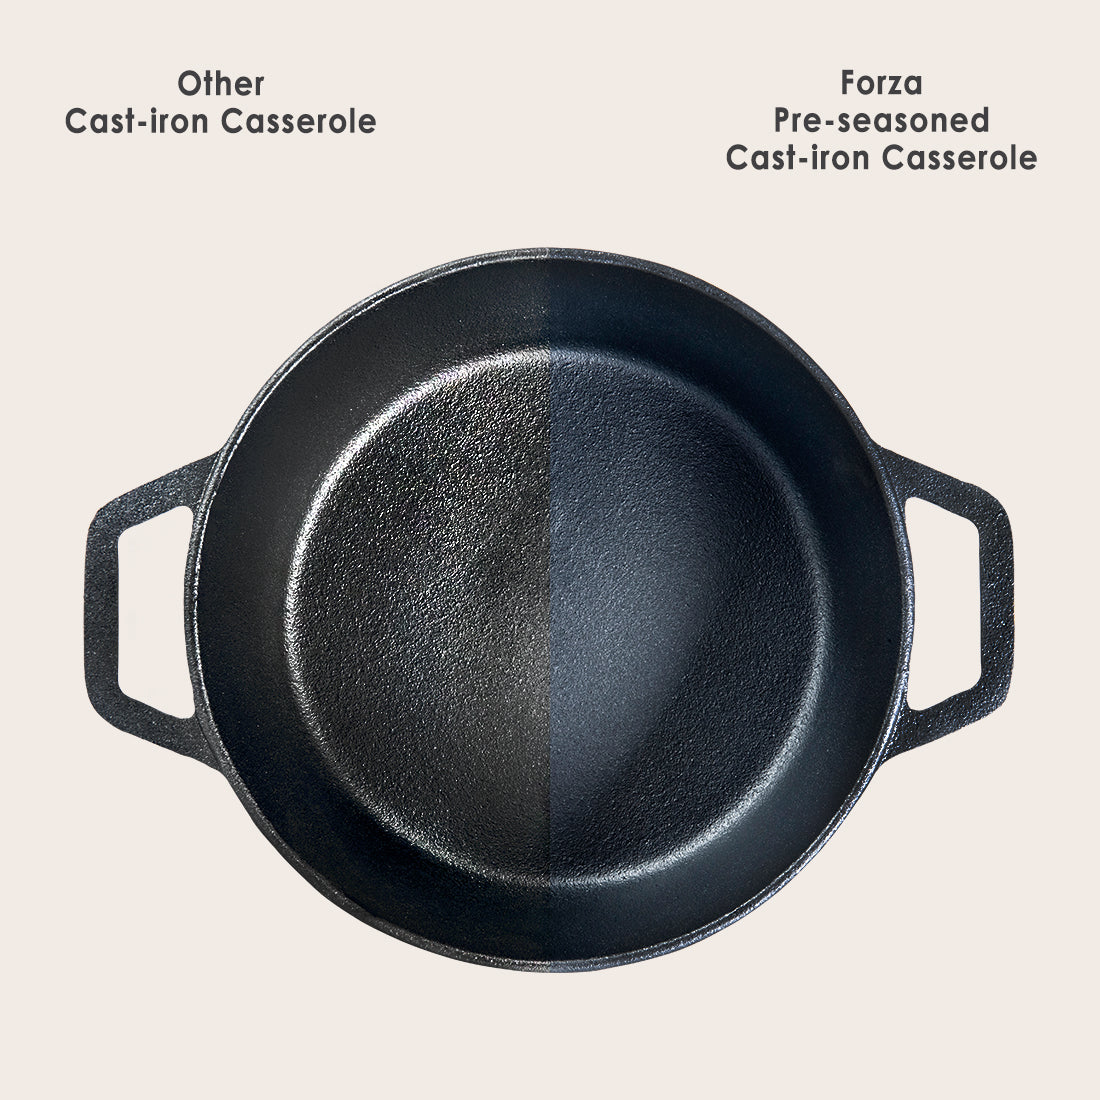 Forza 25 cm Cast-Iron Casserole with Lid | Pre-Seasoned Cookware | Induction Friendly | 4.7 L | 3.8 mm with Lifetime Exchange Warranty